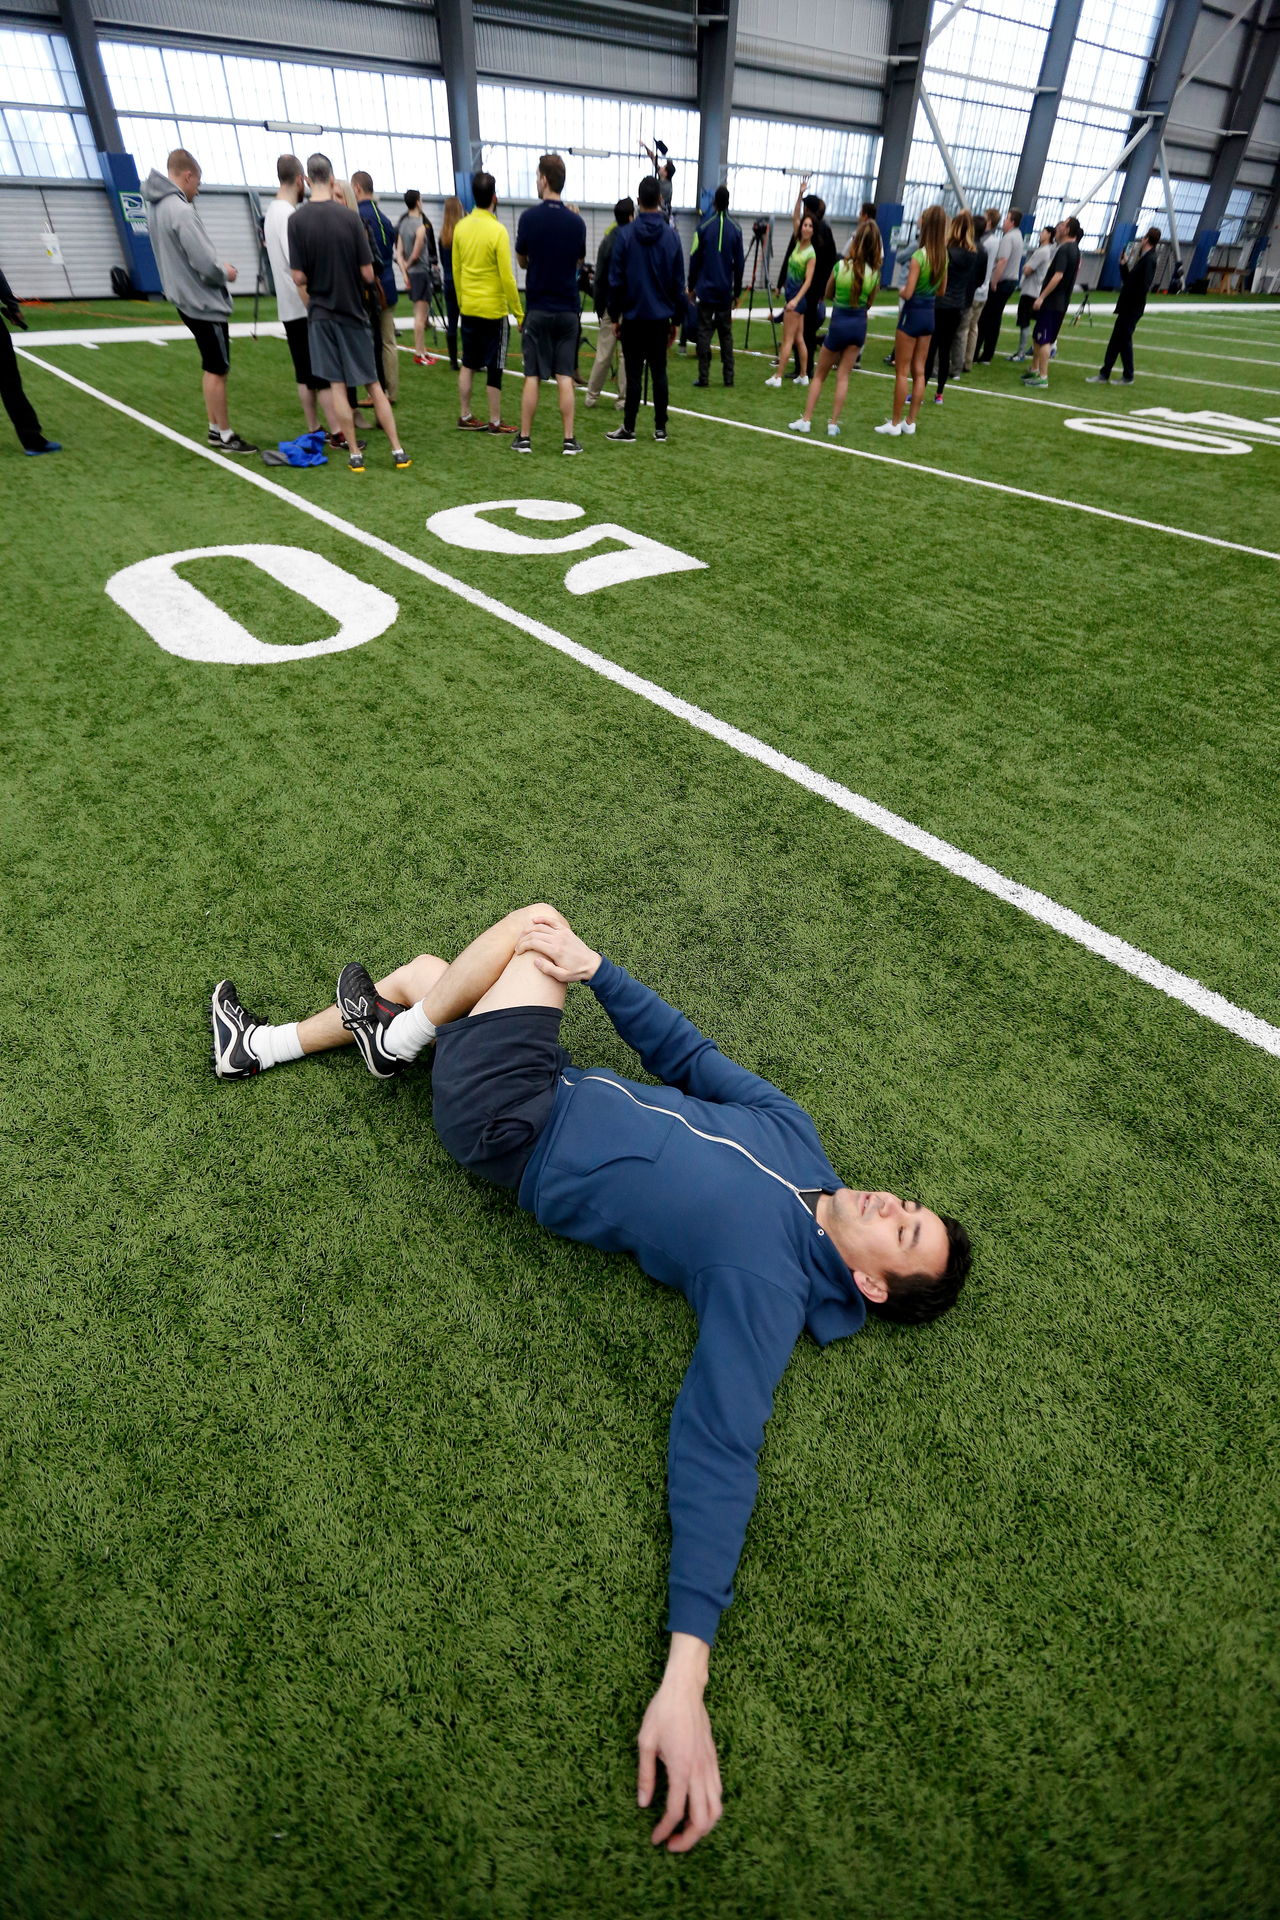 Herald sports writer Nick Patterson stretches after injuring his back at the media combine held at the Seattle Seahawks’ Virginia Mason Athletic Center on Feb. 29.